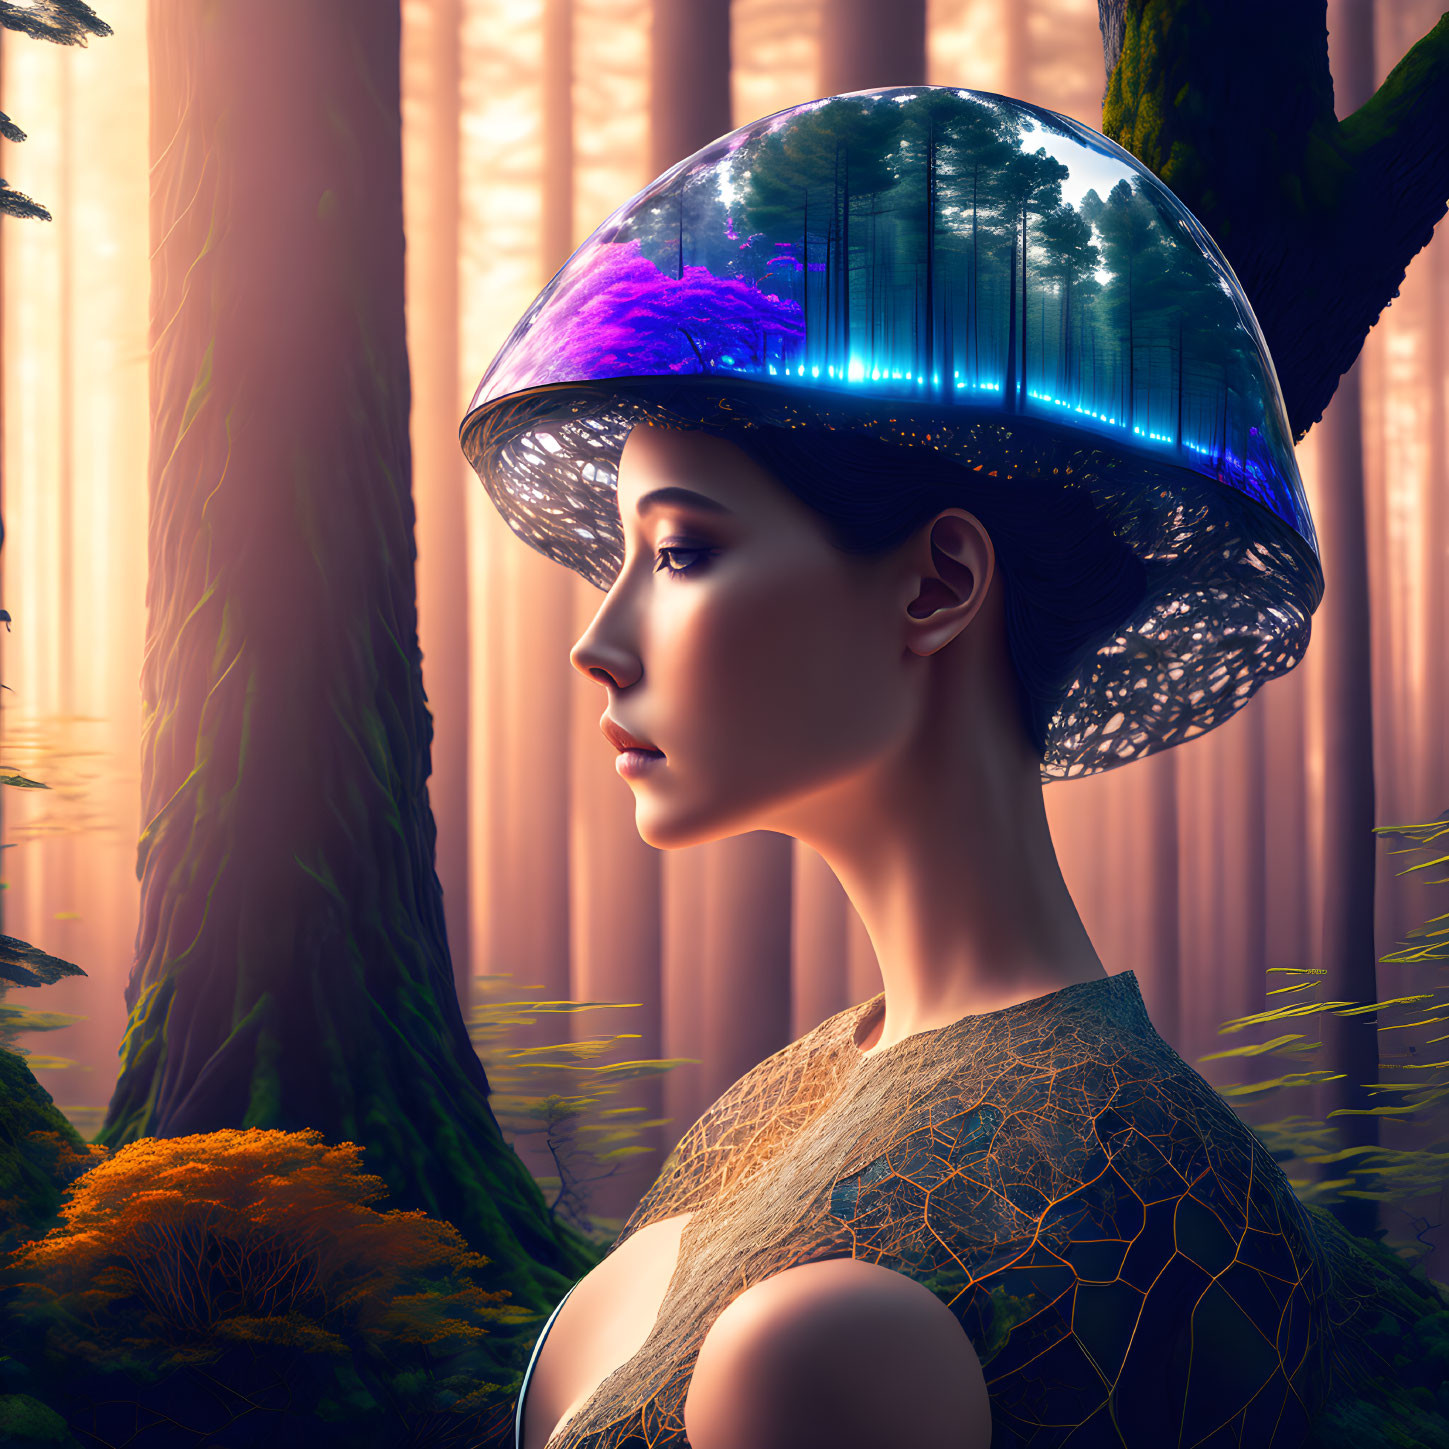 Woman in transparent forest helmet surrounded by towering trees